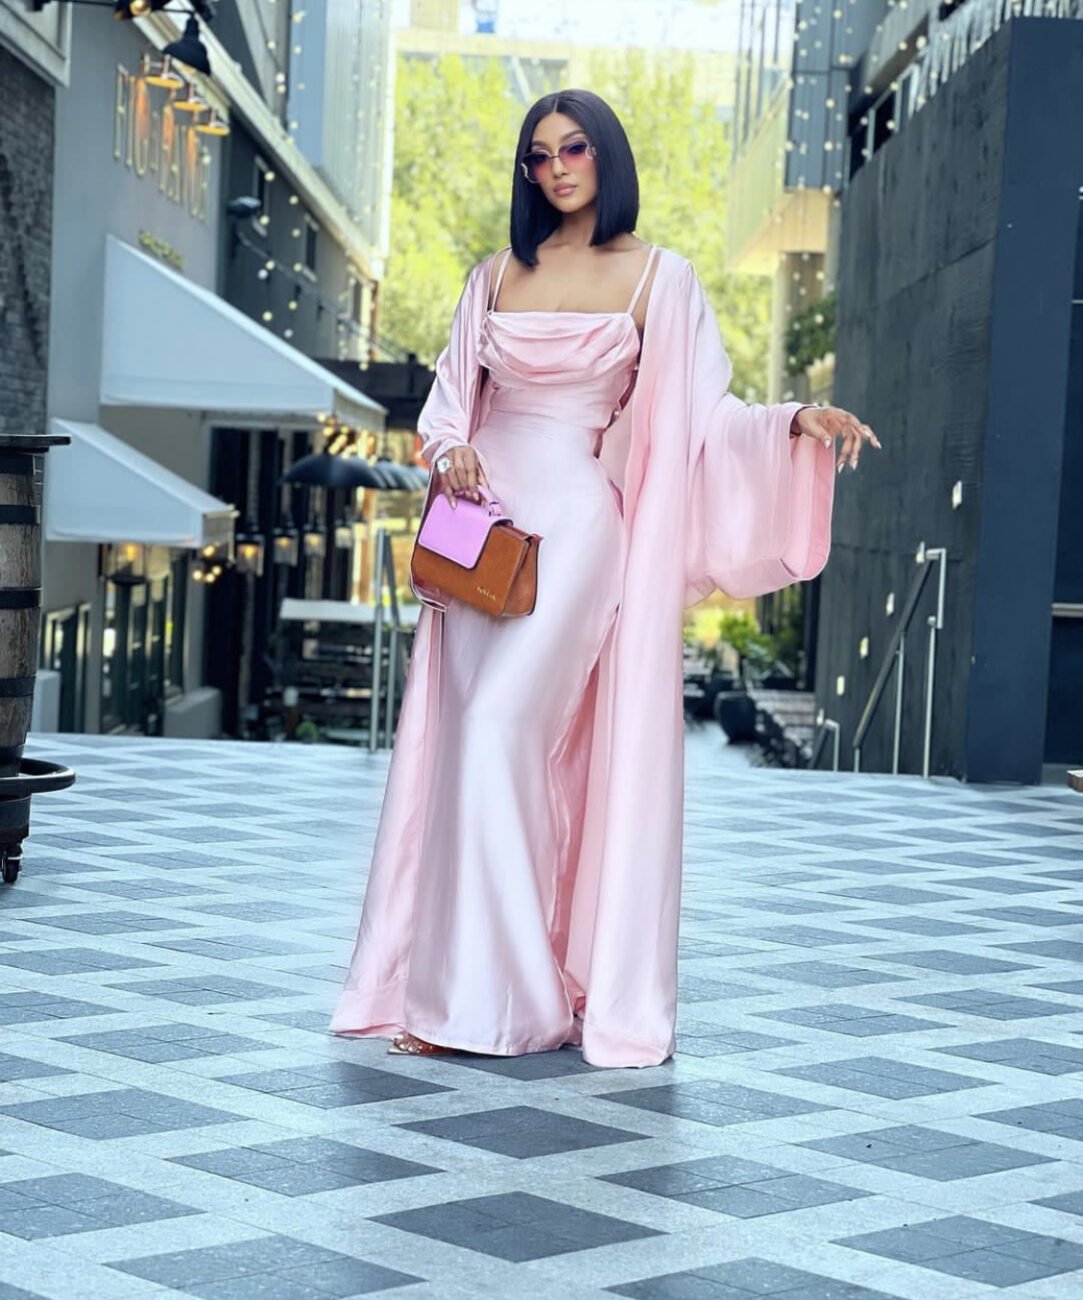 Lovely pink silk dress paired with a matching kimono.